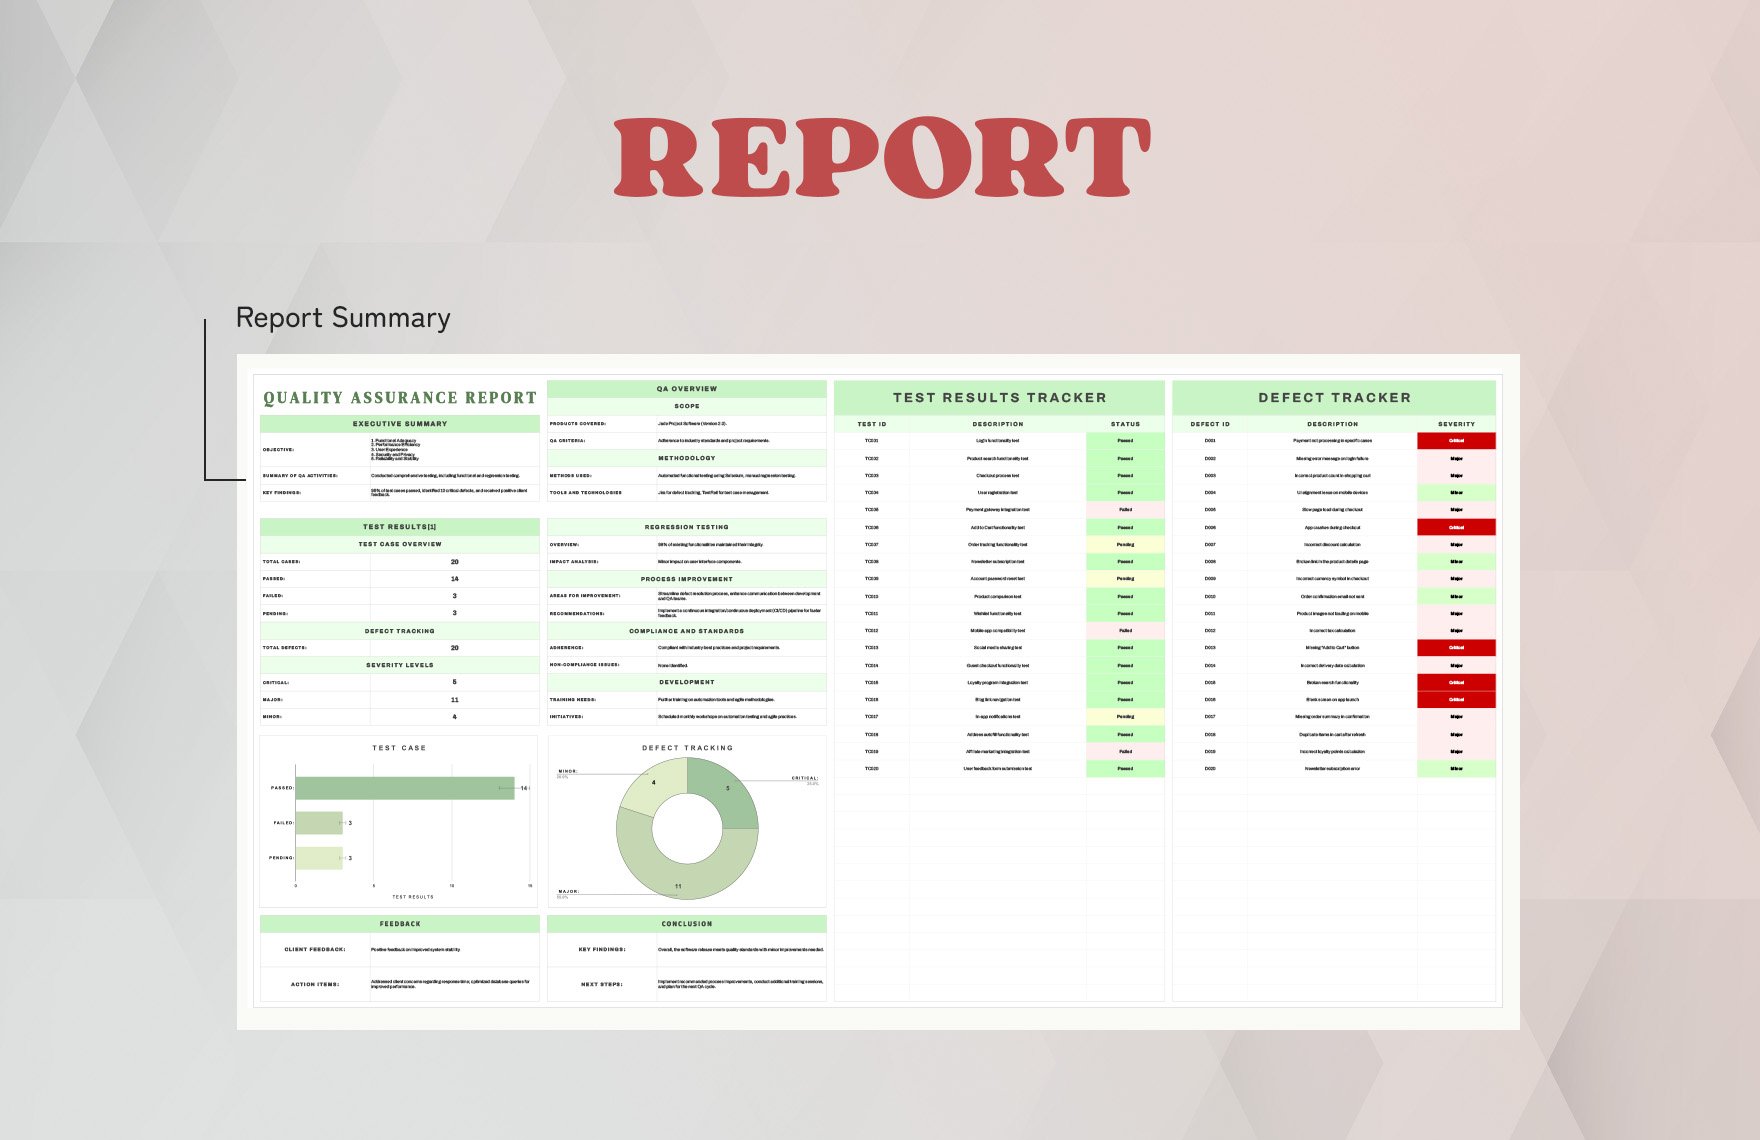 Quality Assurance Report Template